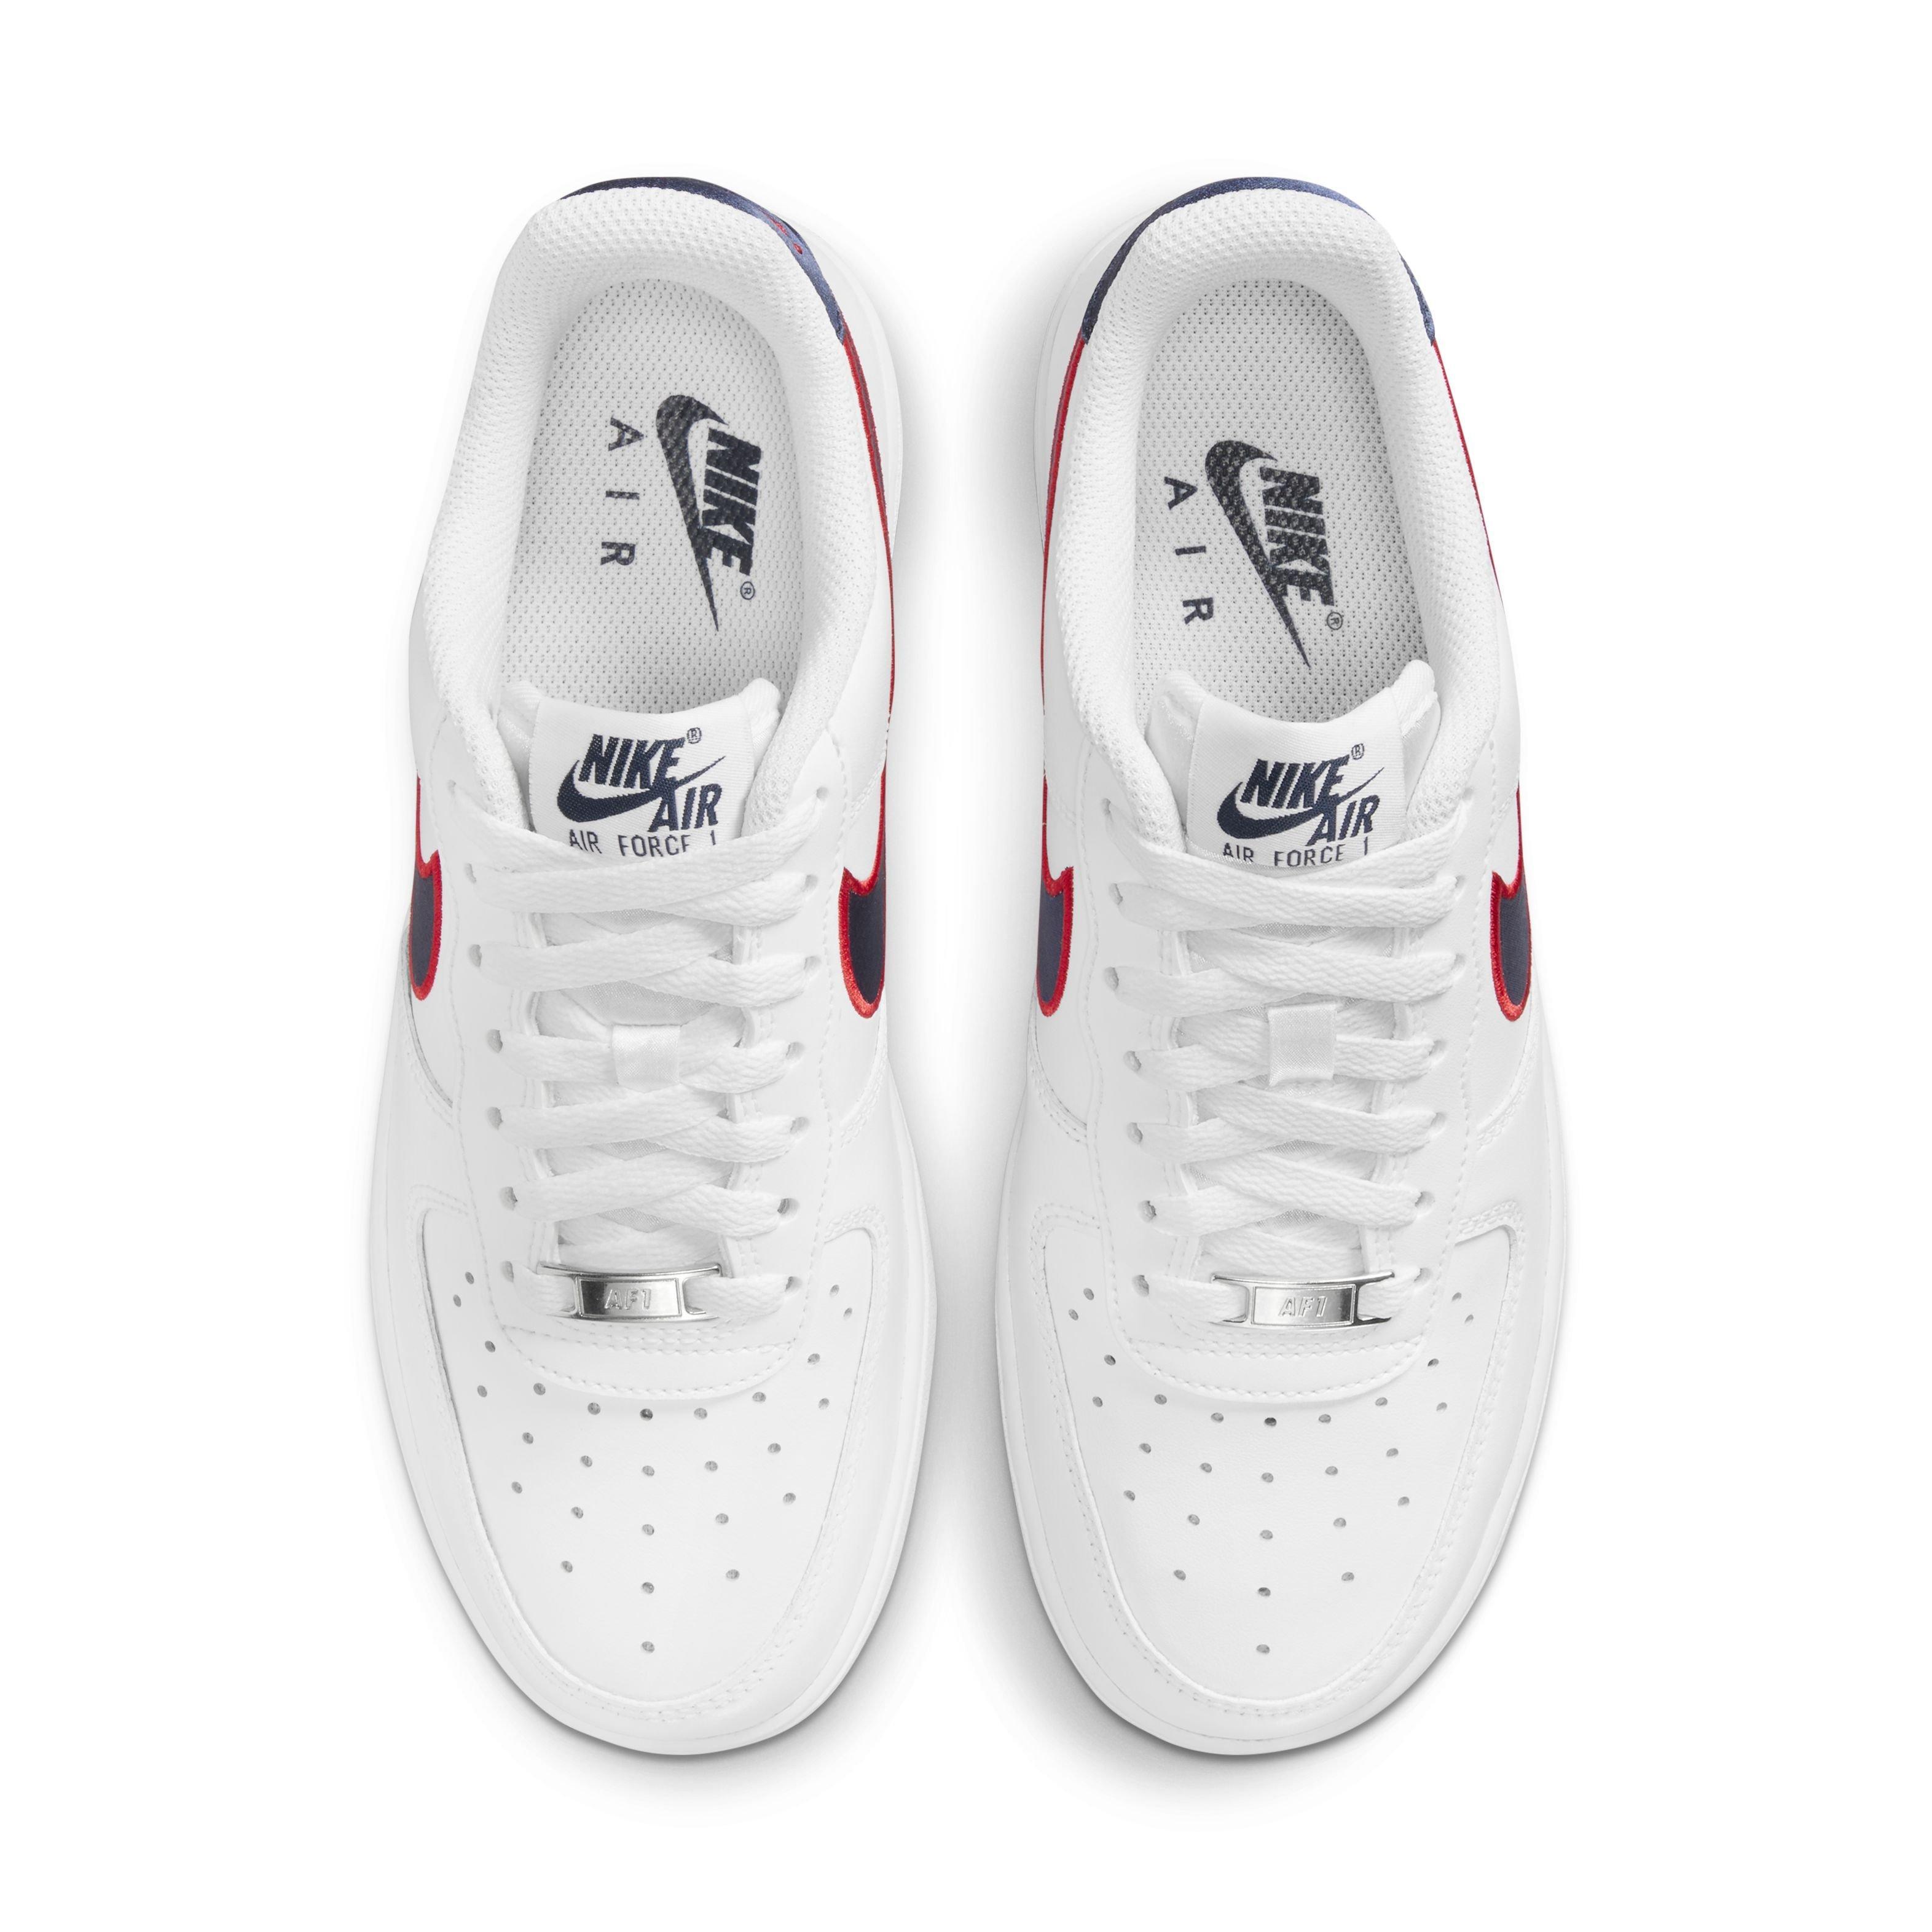 Air Force 1 LV8 Obsidian White Red (GS) - SNEAKERGALLERY